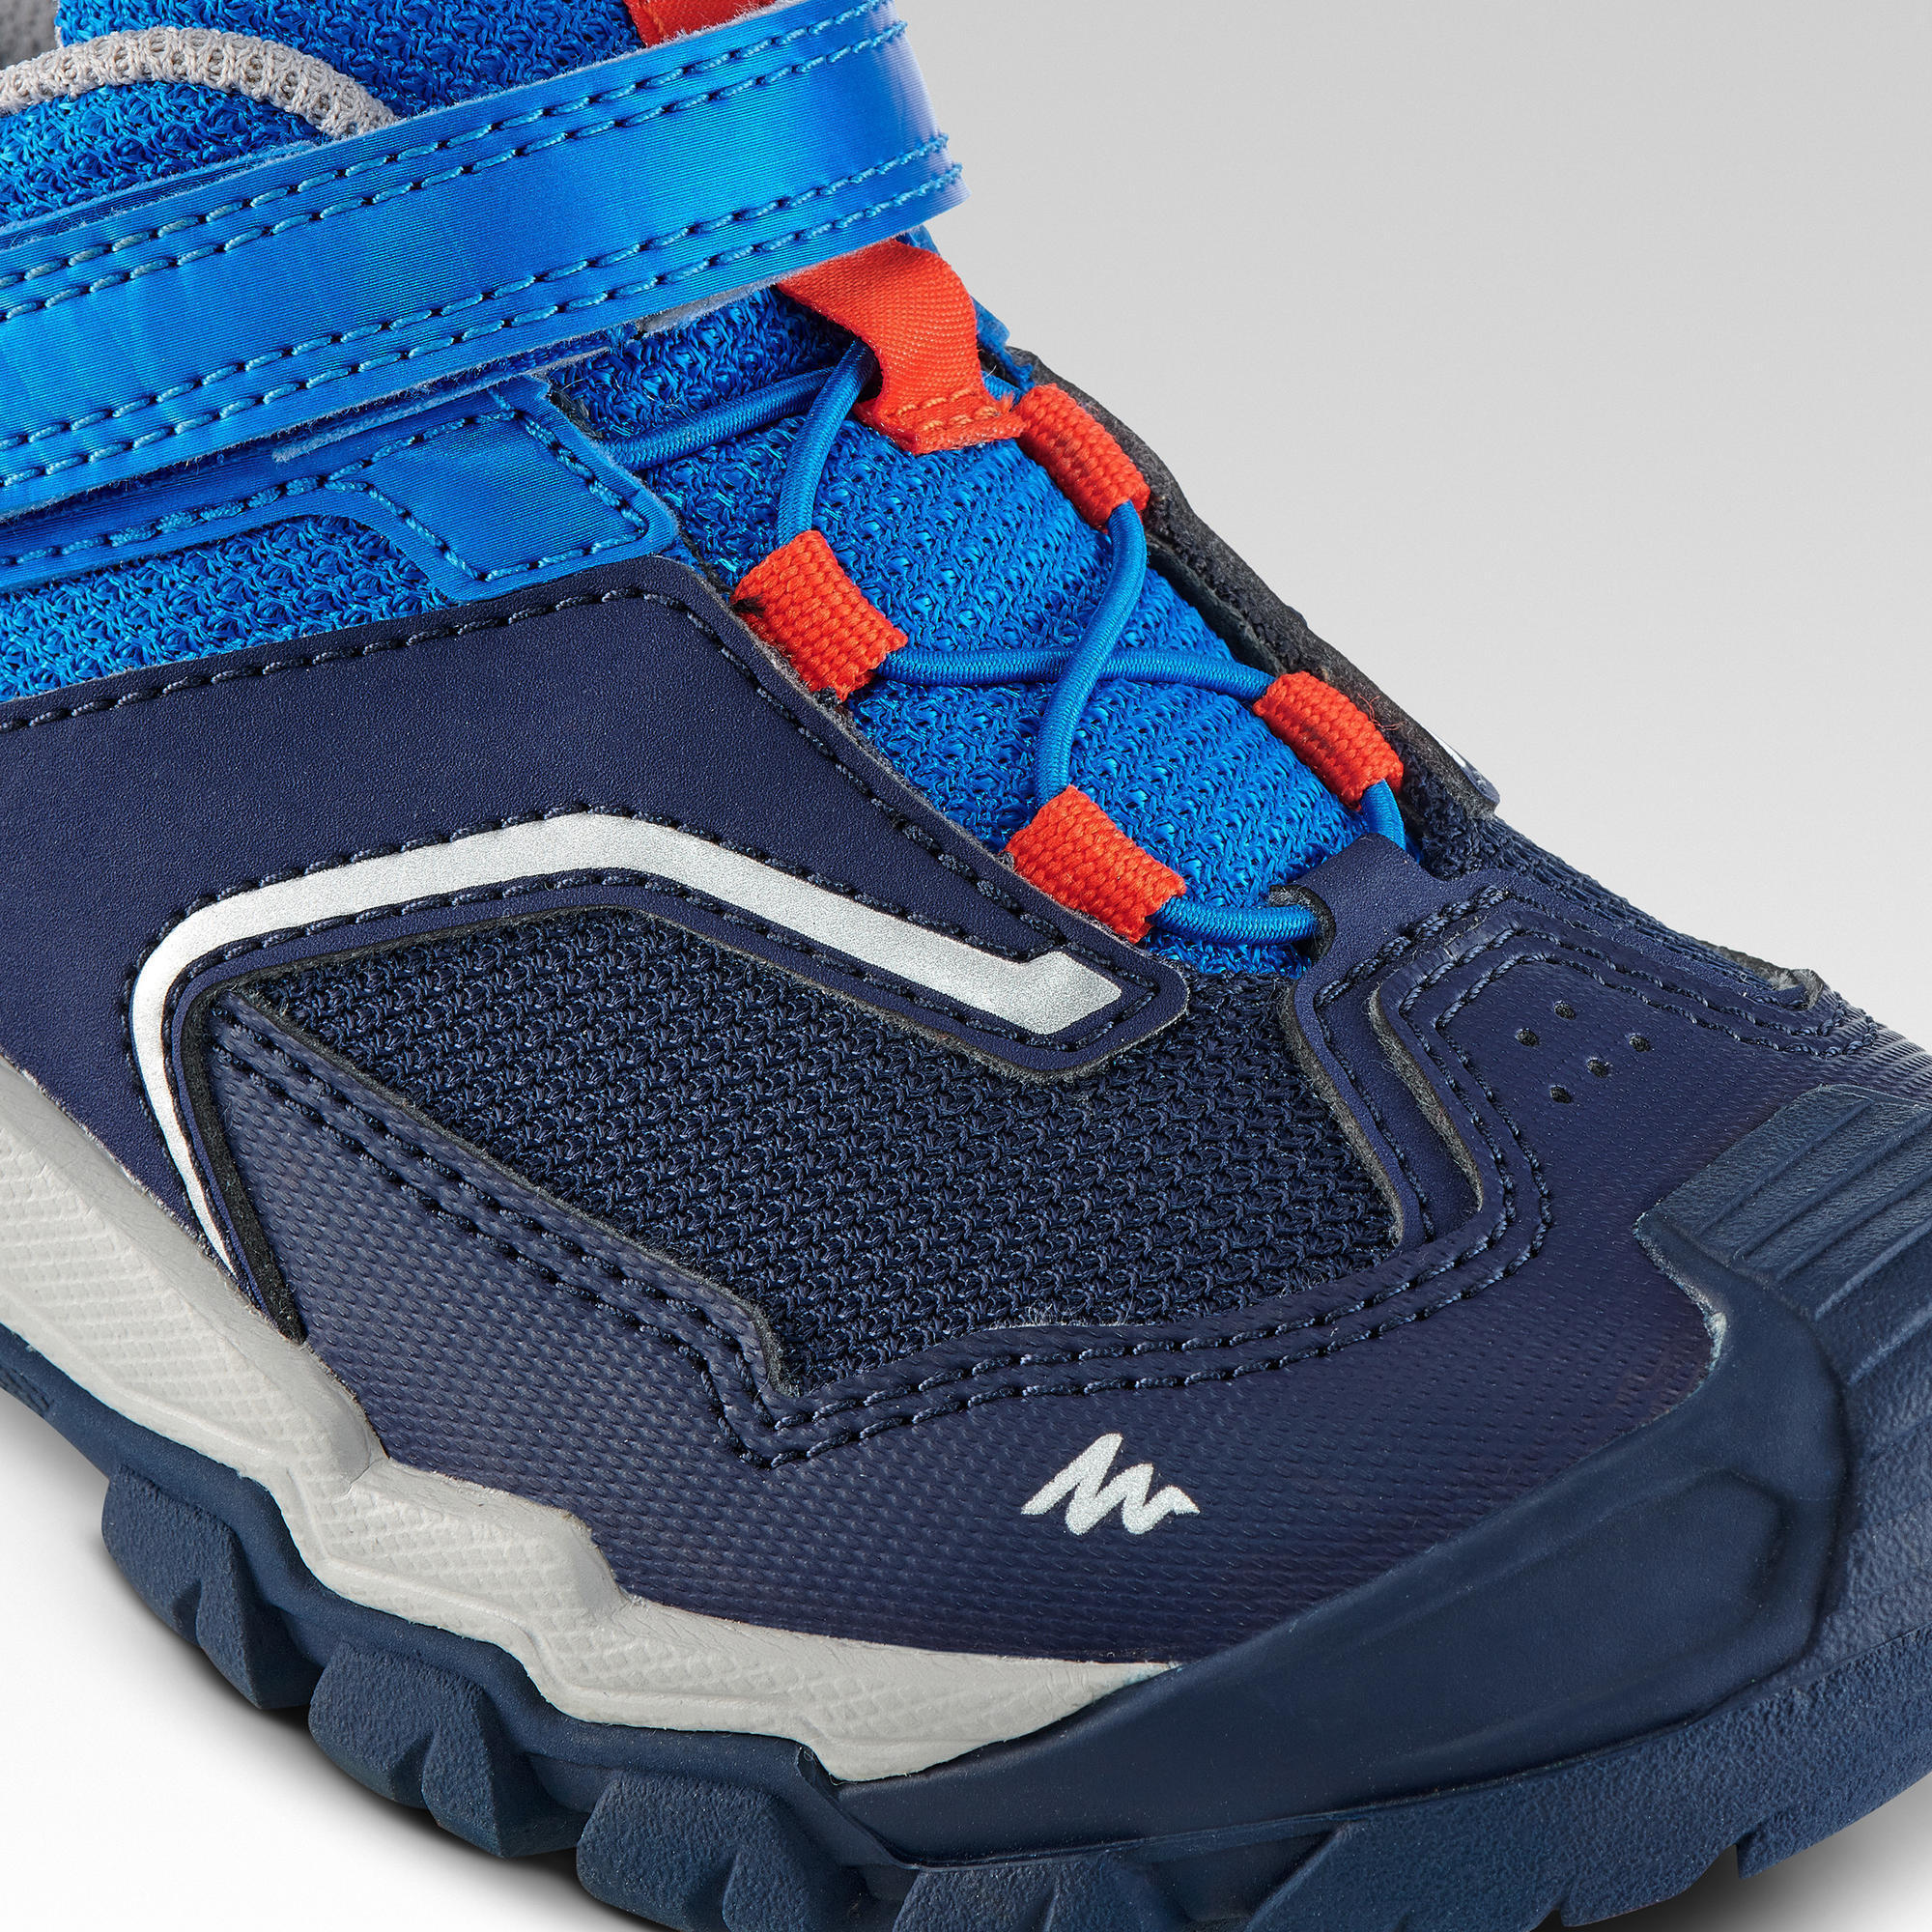 Child's Low Walking Shoes - Navy Blue 6/7